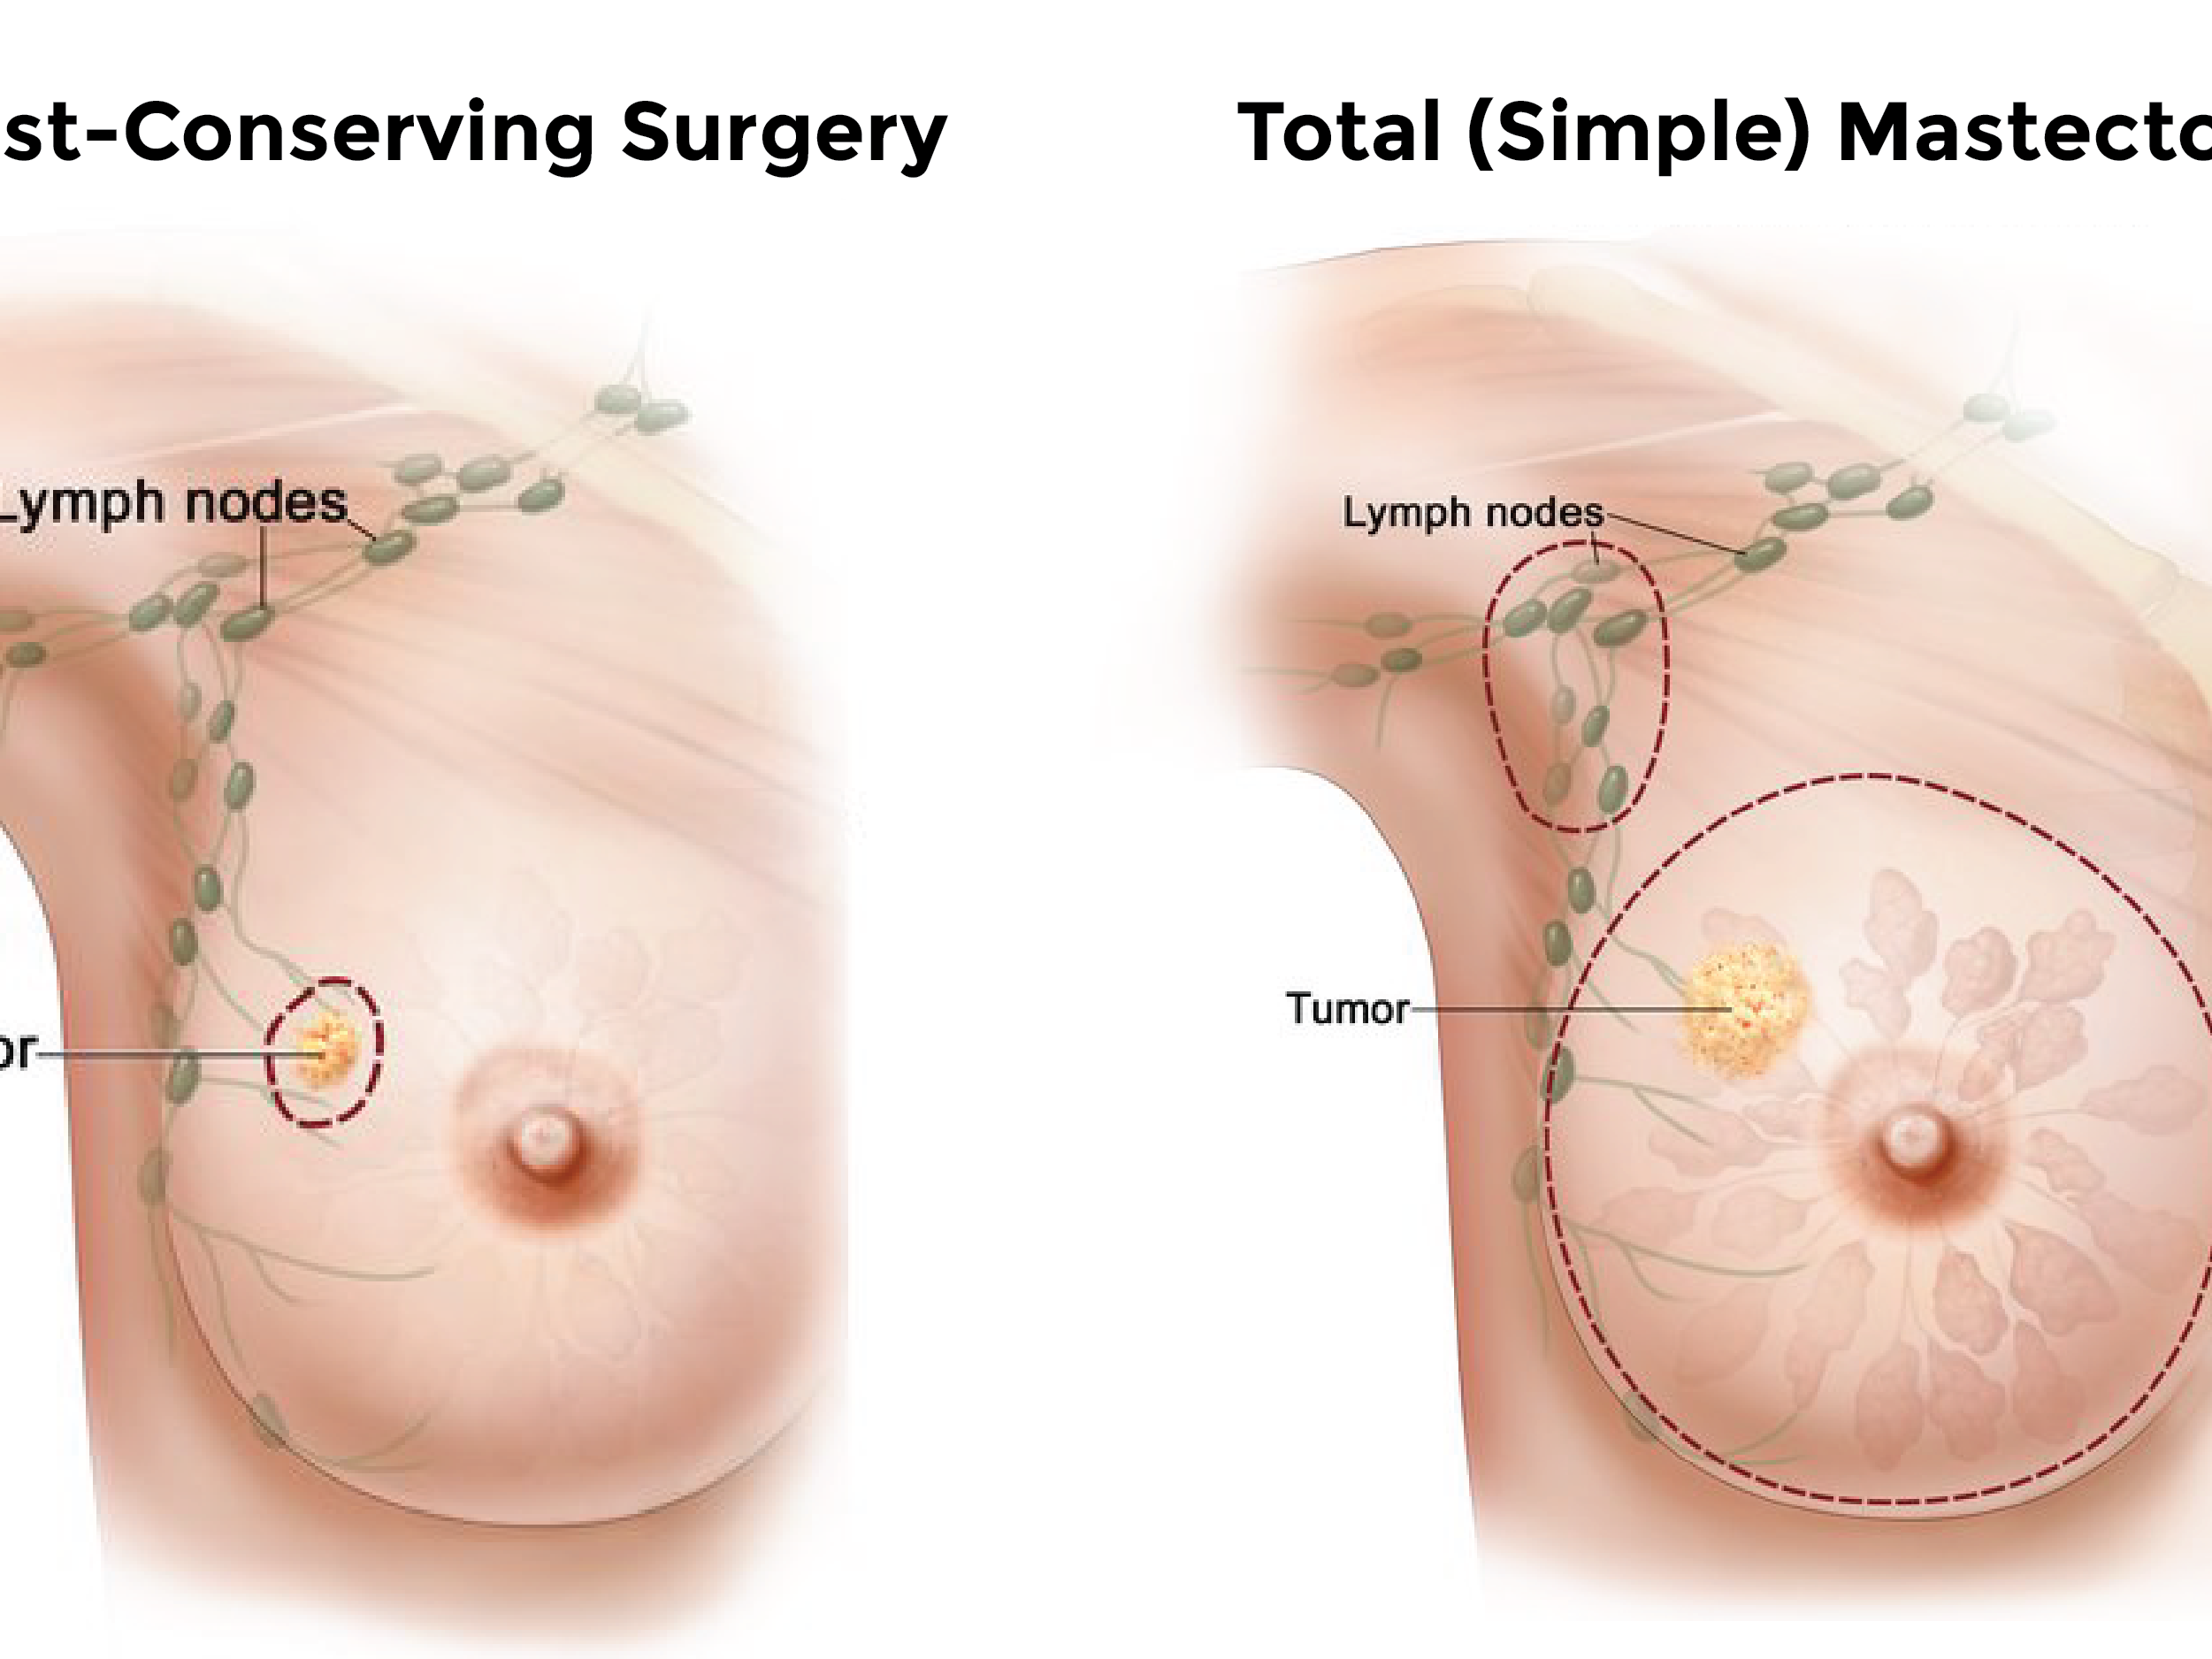 What Do Patients Need to Know About Breast Reconstruction?